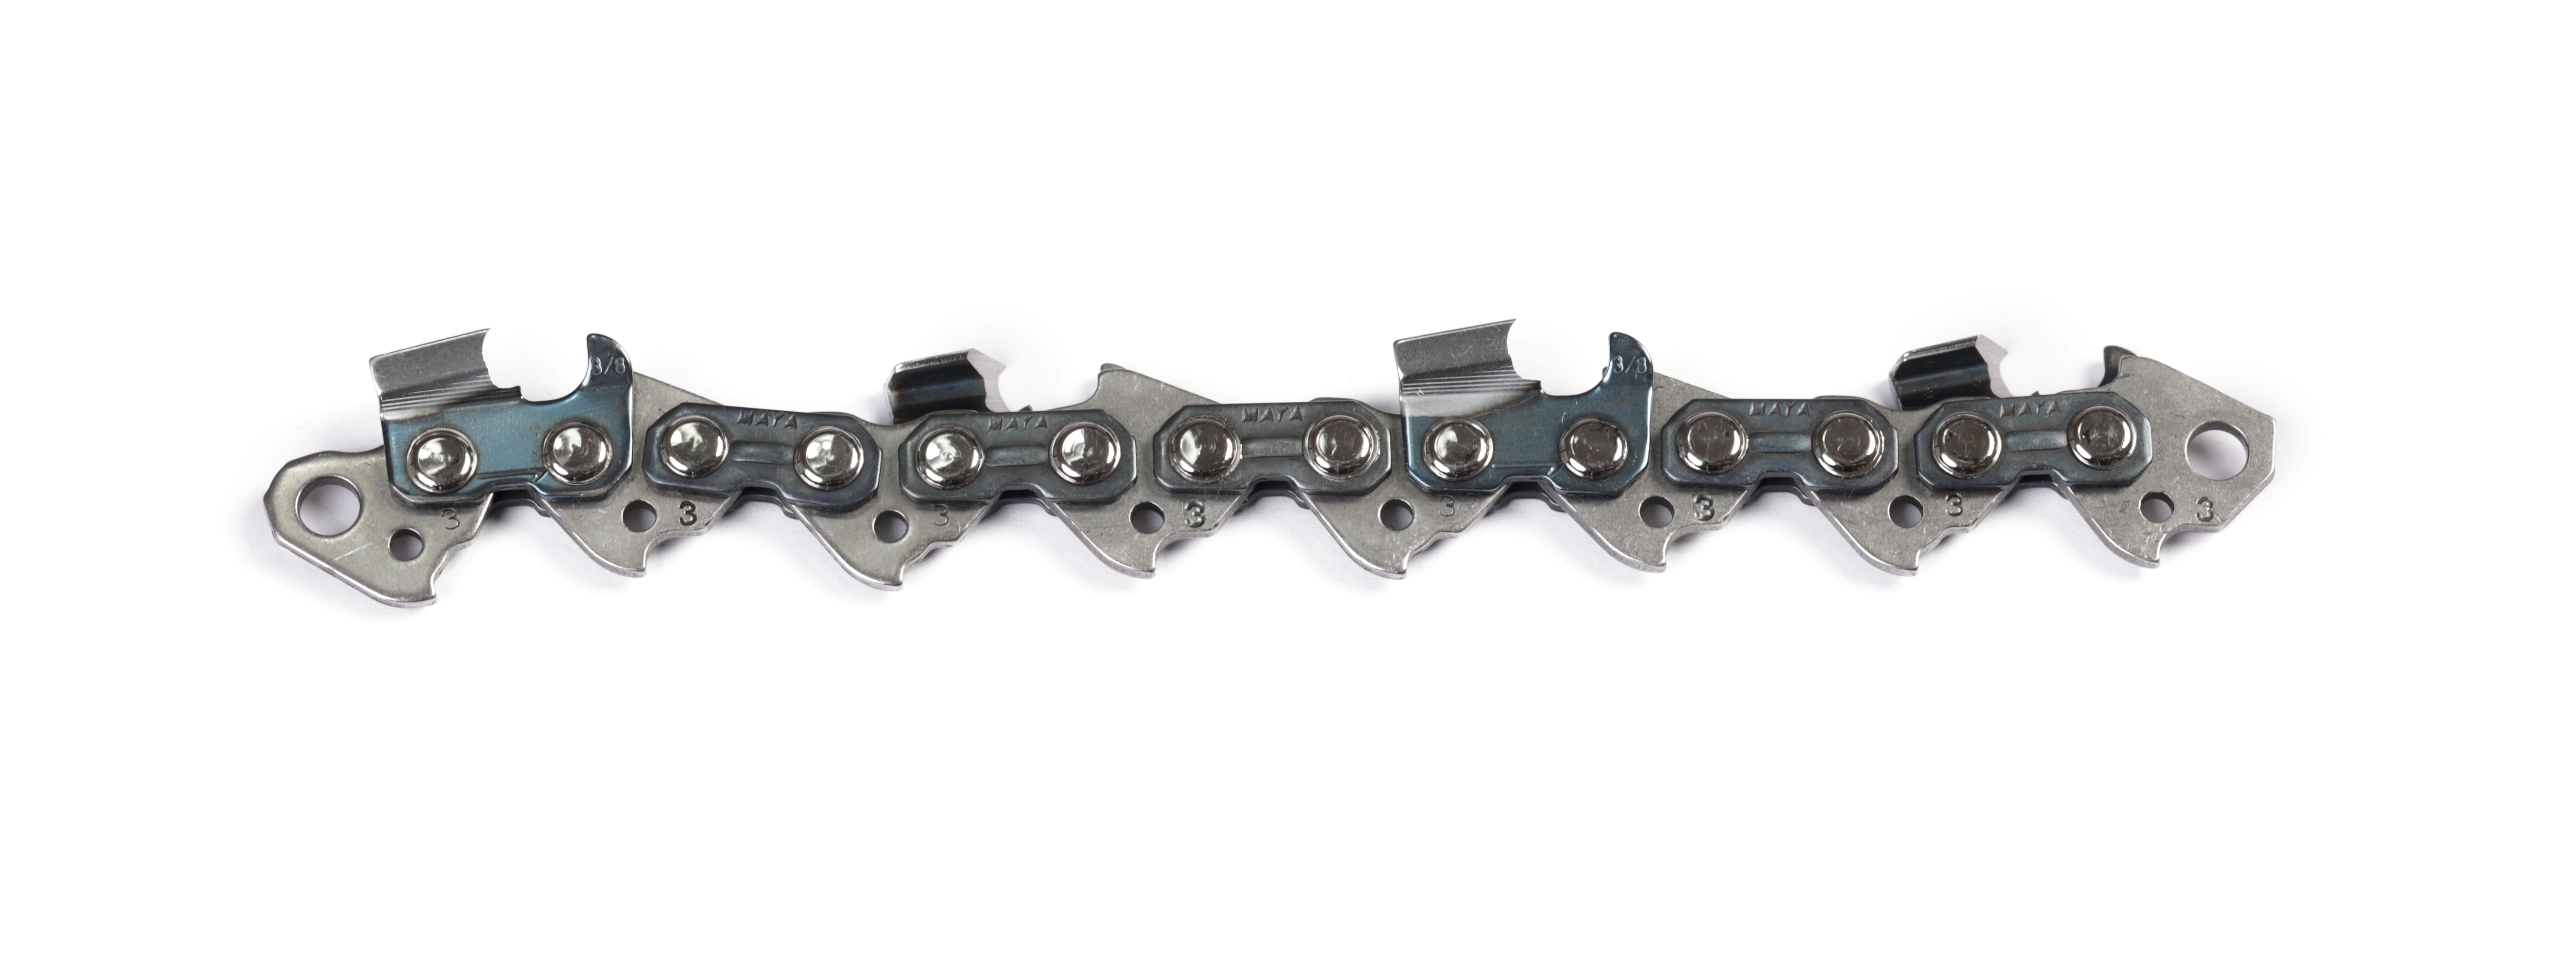 chain for chainsaw,chain for chainsaw Factory